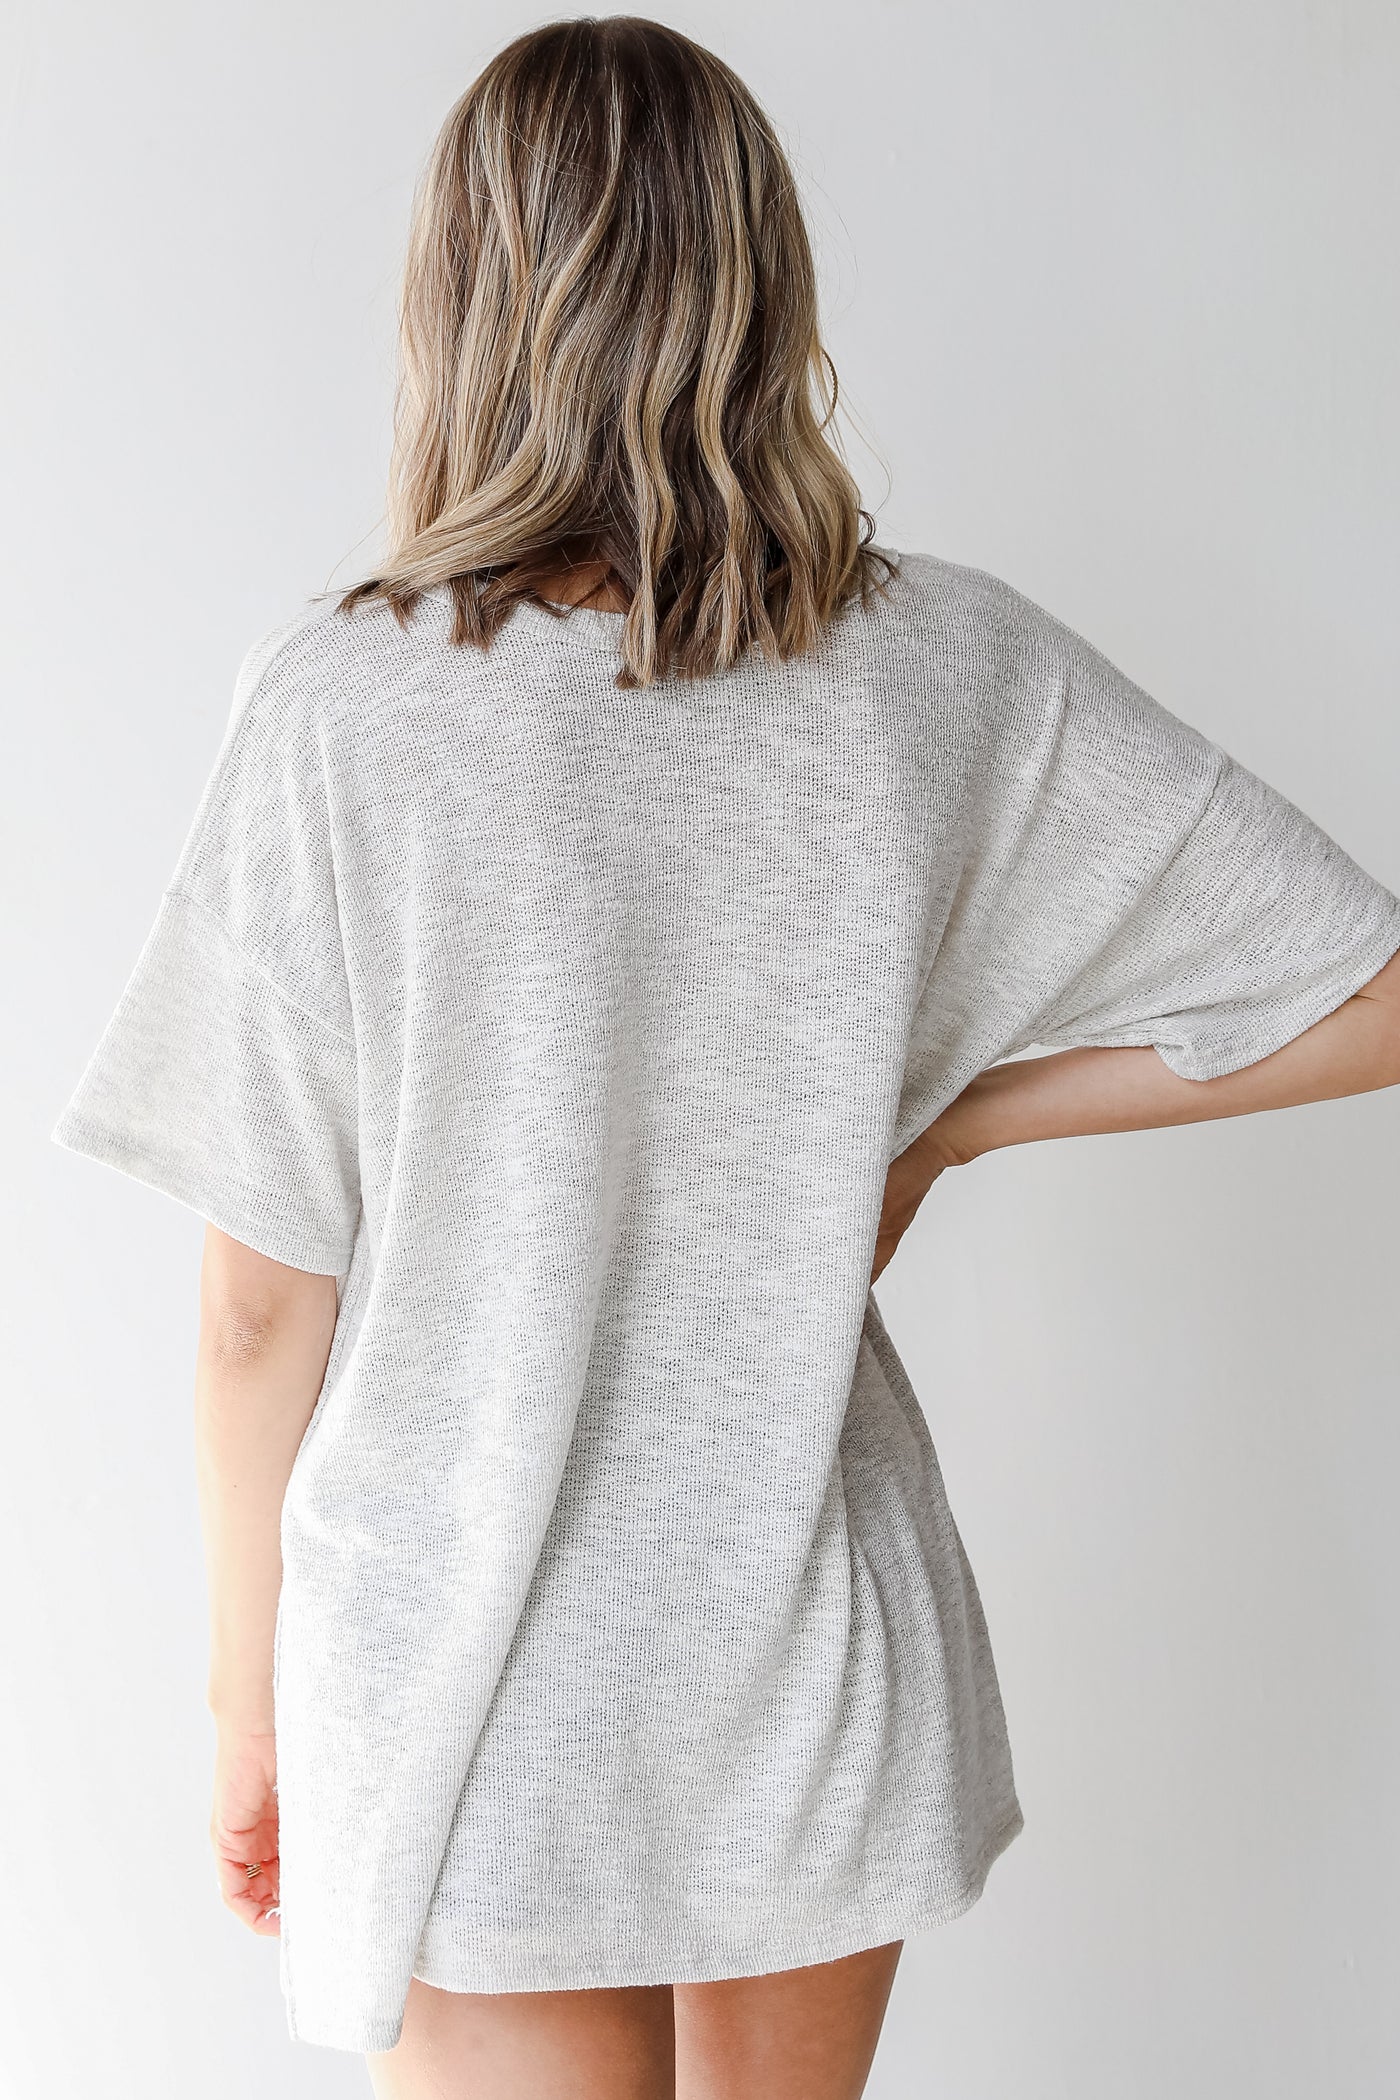 Knit Tee in heather grey back view